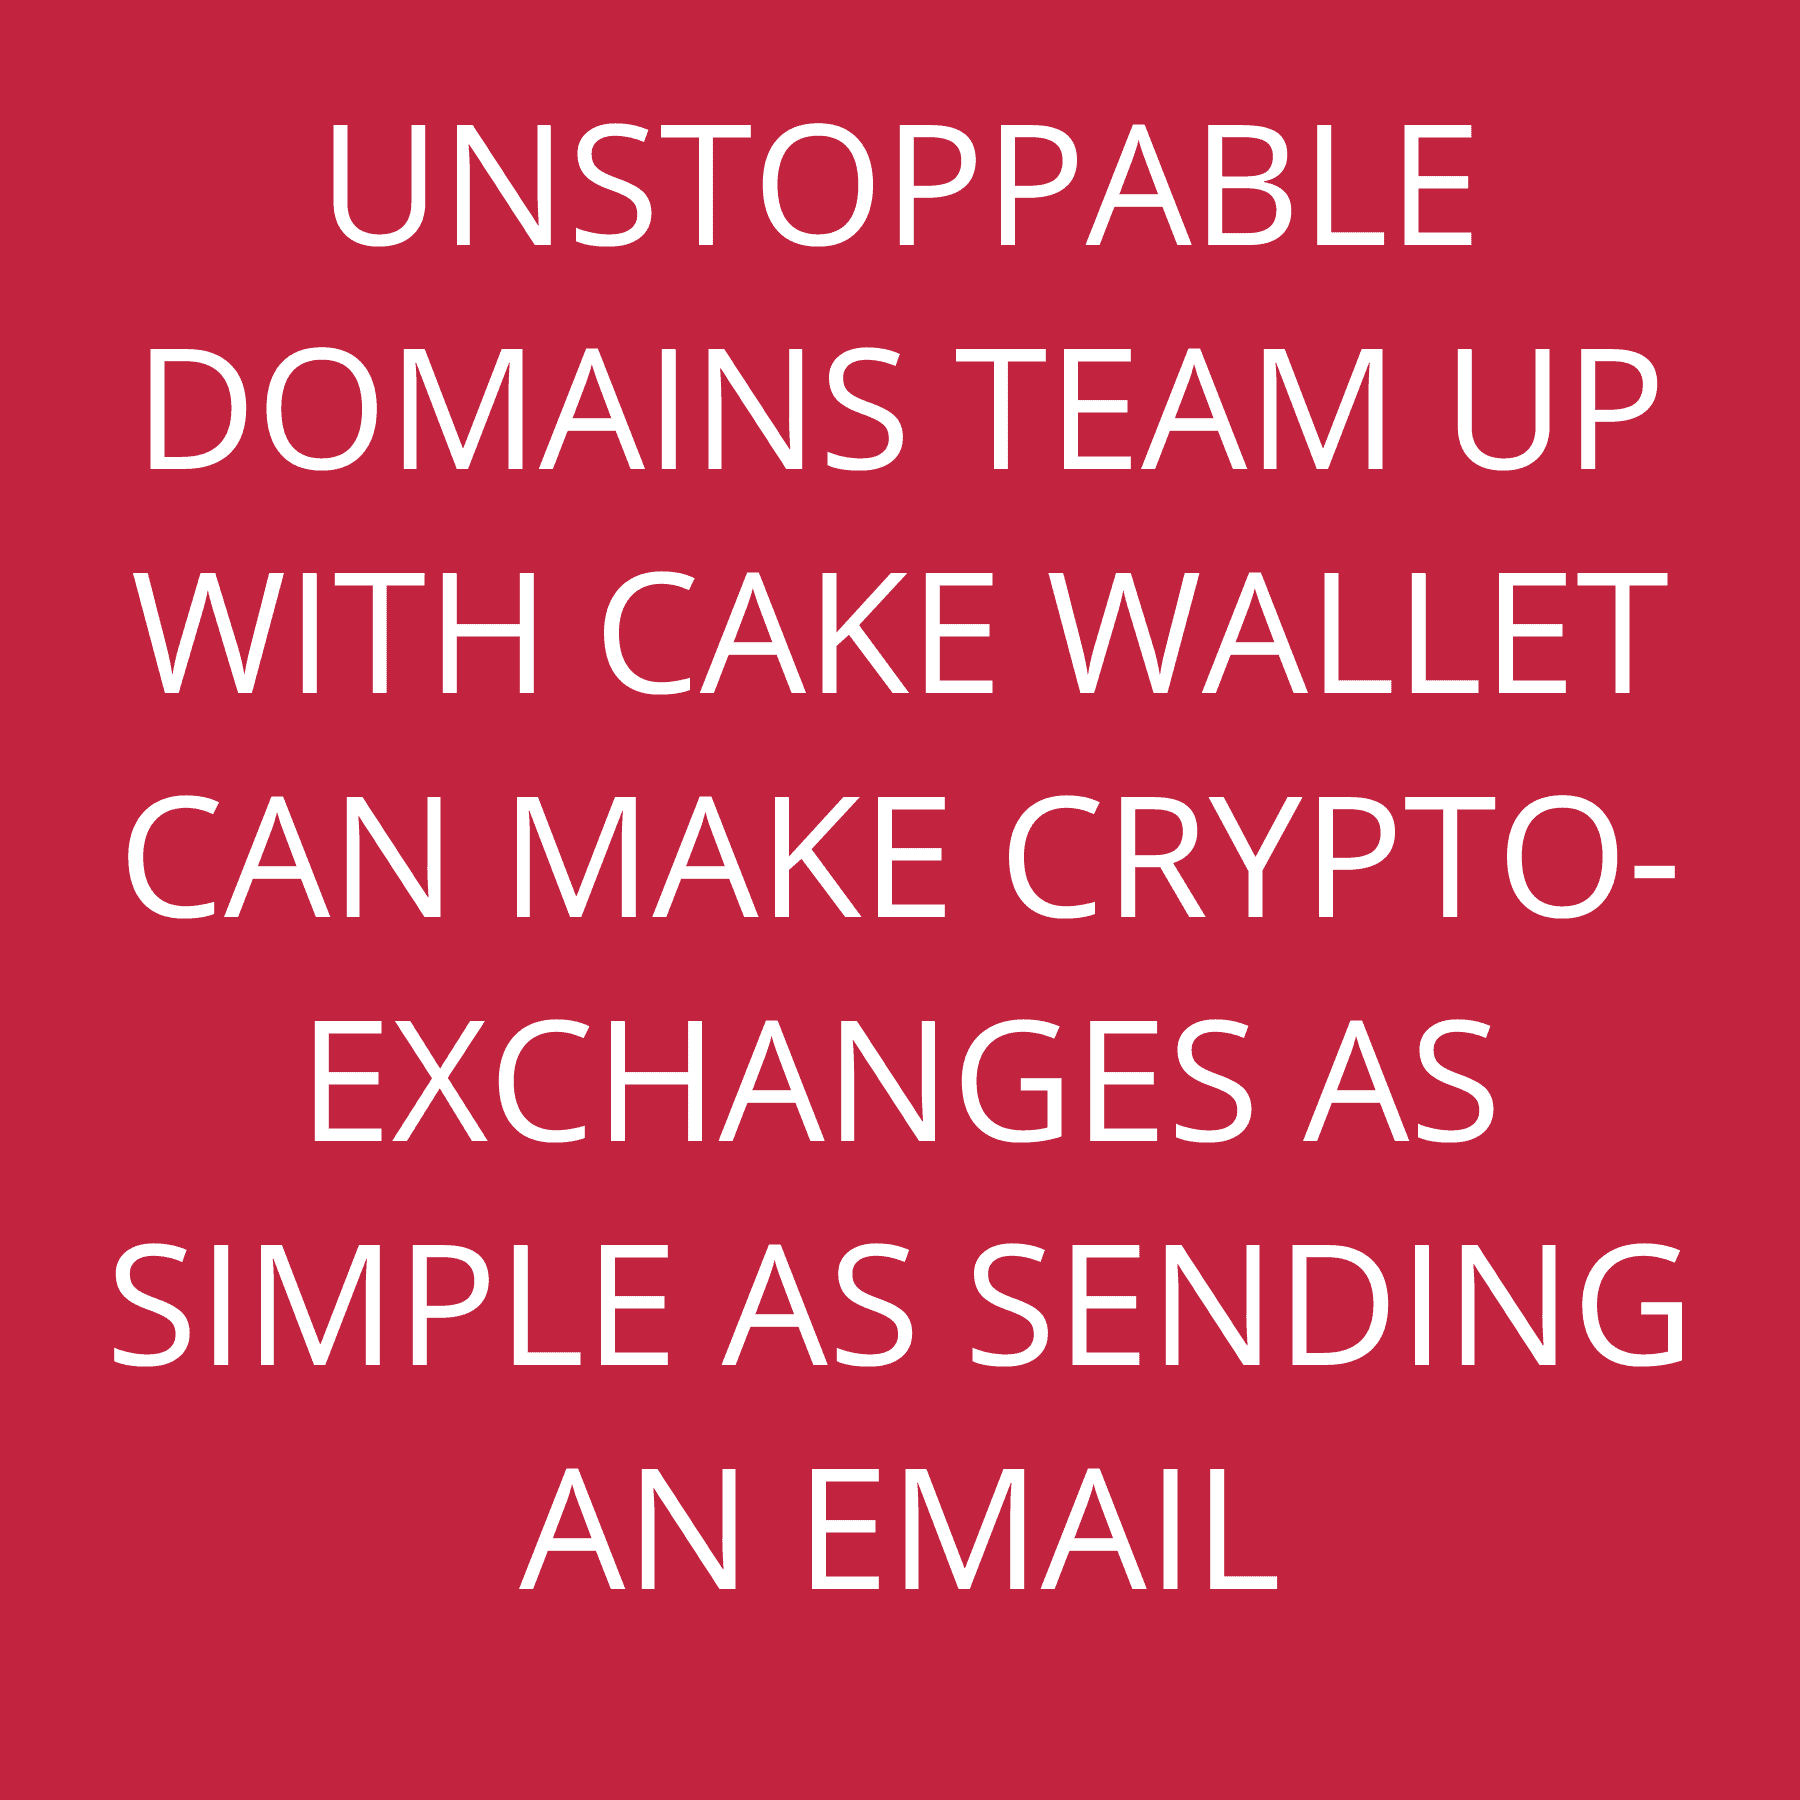 Unstoppable Domains team up with Cake Wallet can make crypto-exchanges as simple as sending an Email